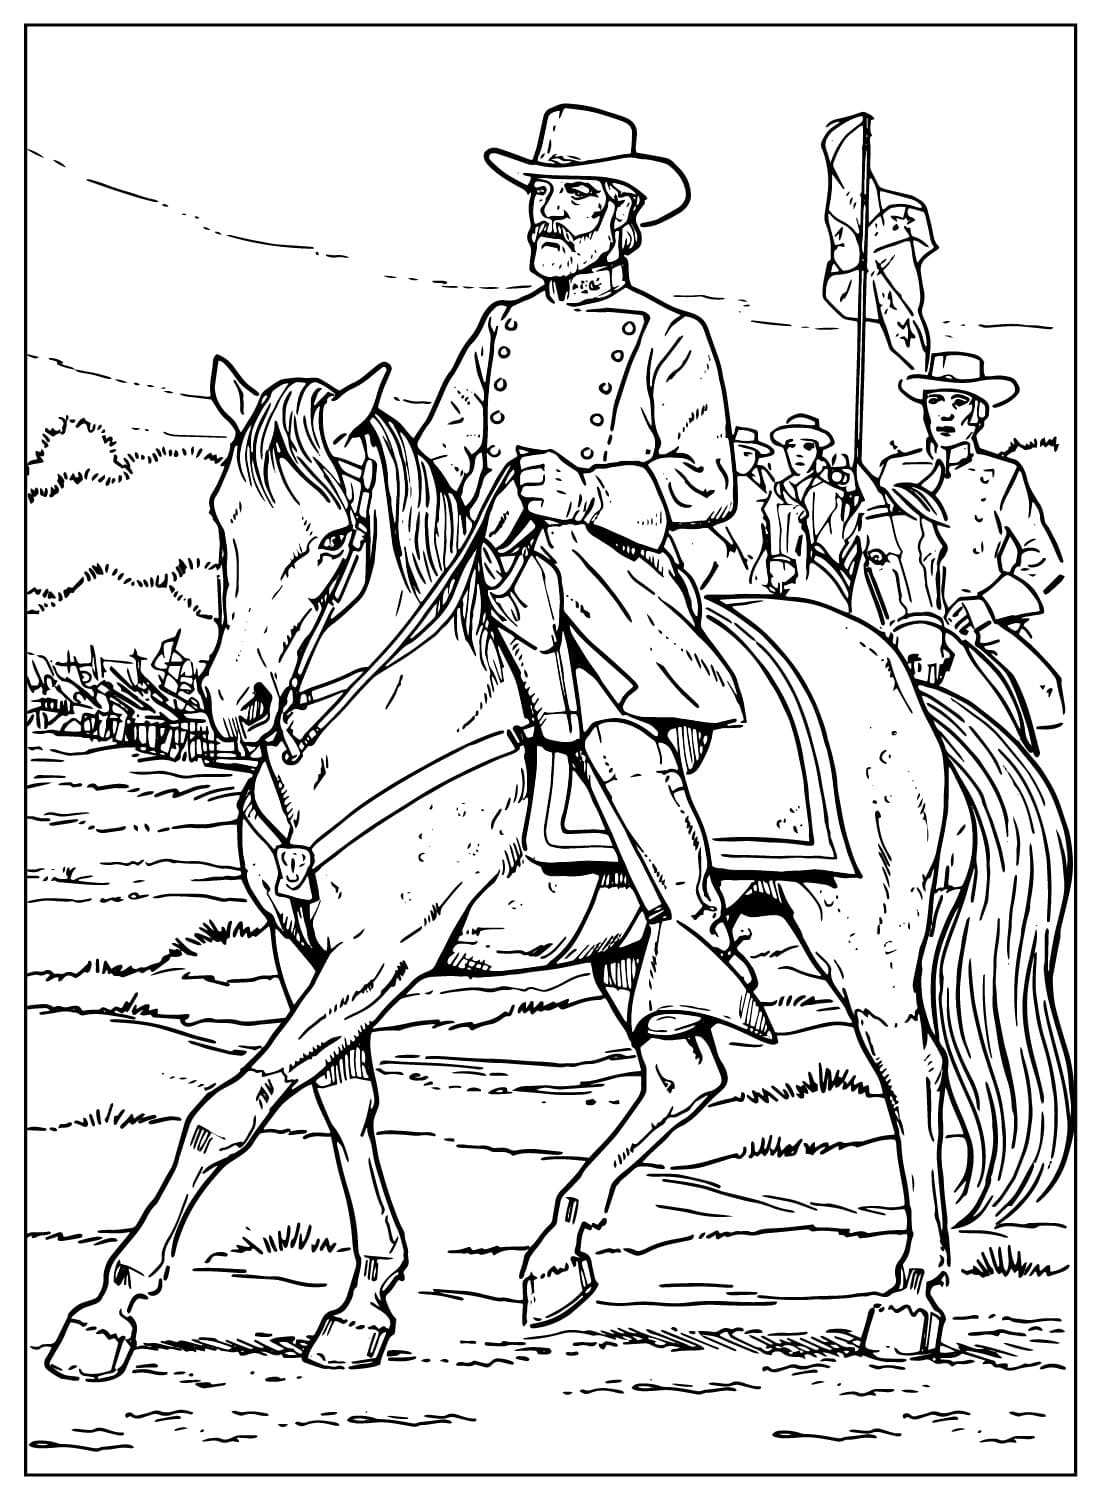 Robert E. Lee Free Coloring Page from Robert E. Lee